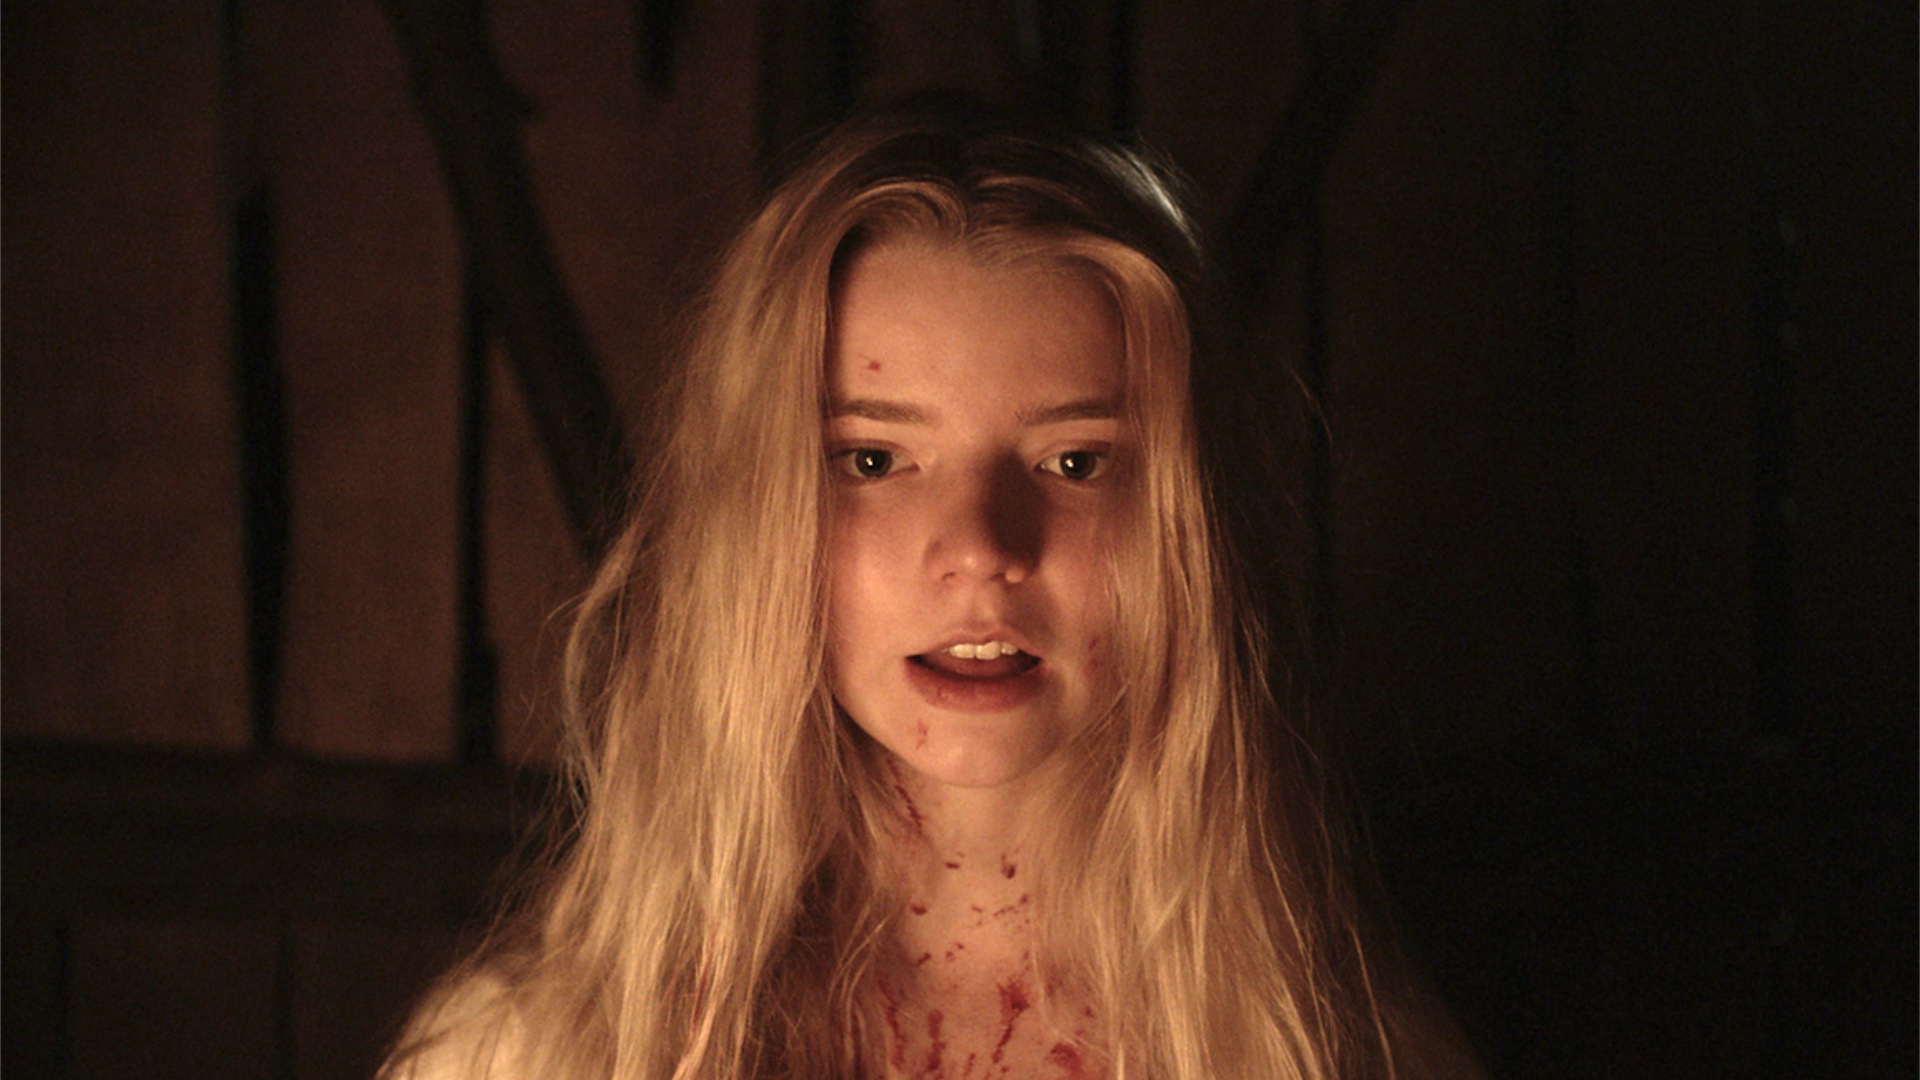 Thomasin looking at the camera with a satisfied expresion on her face in The Witch.